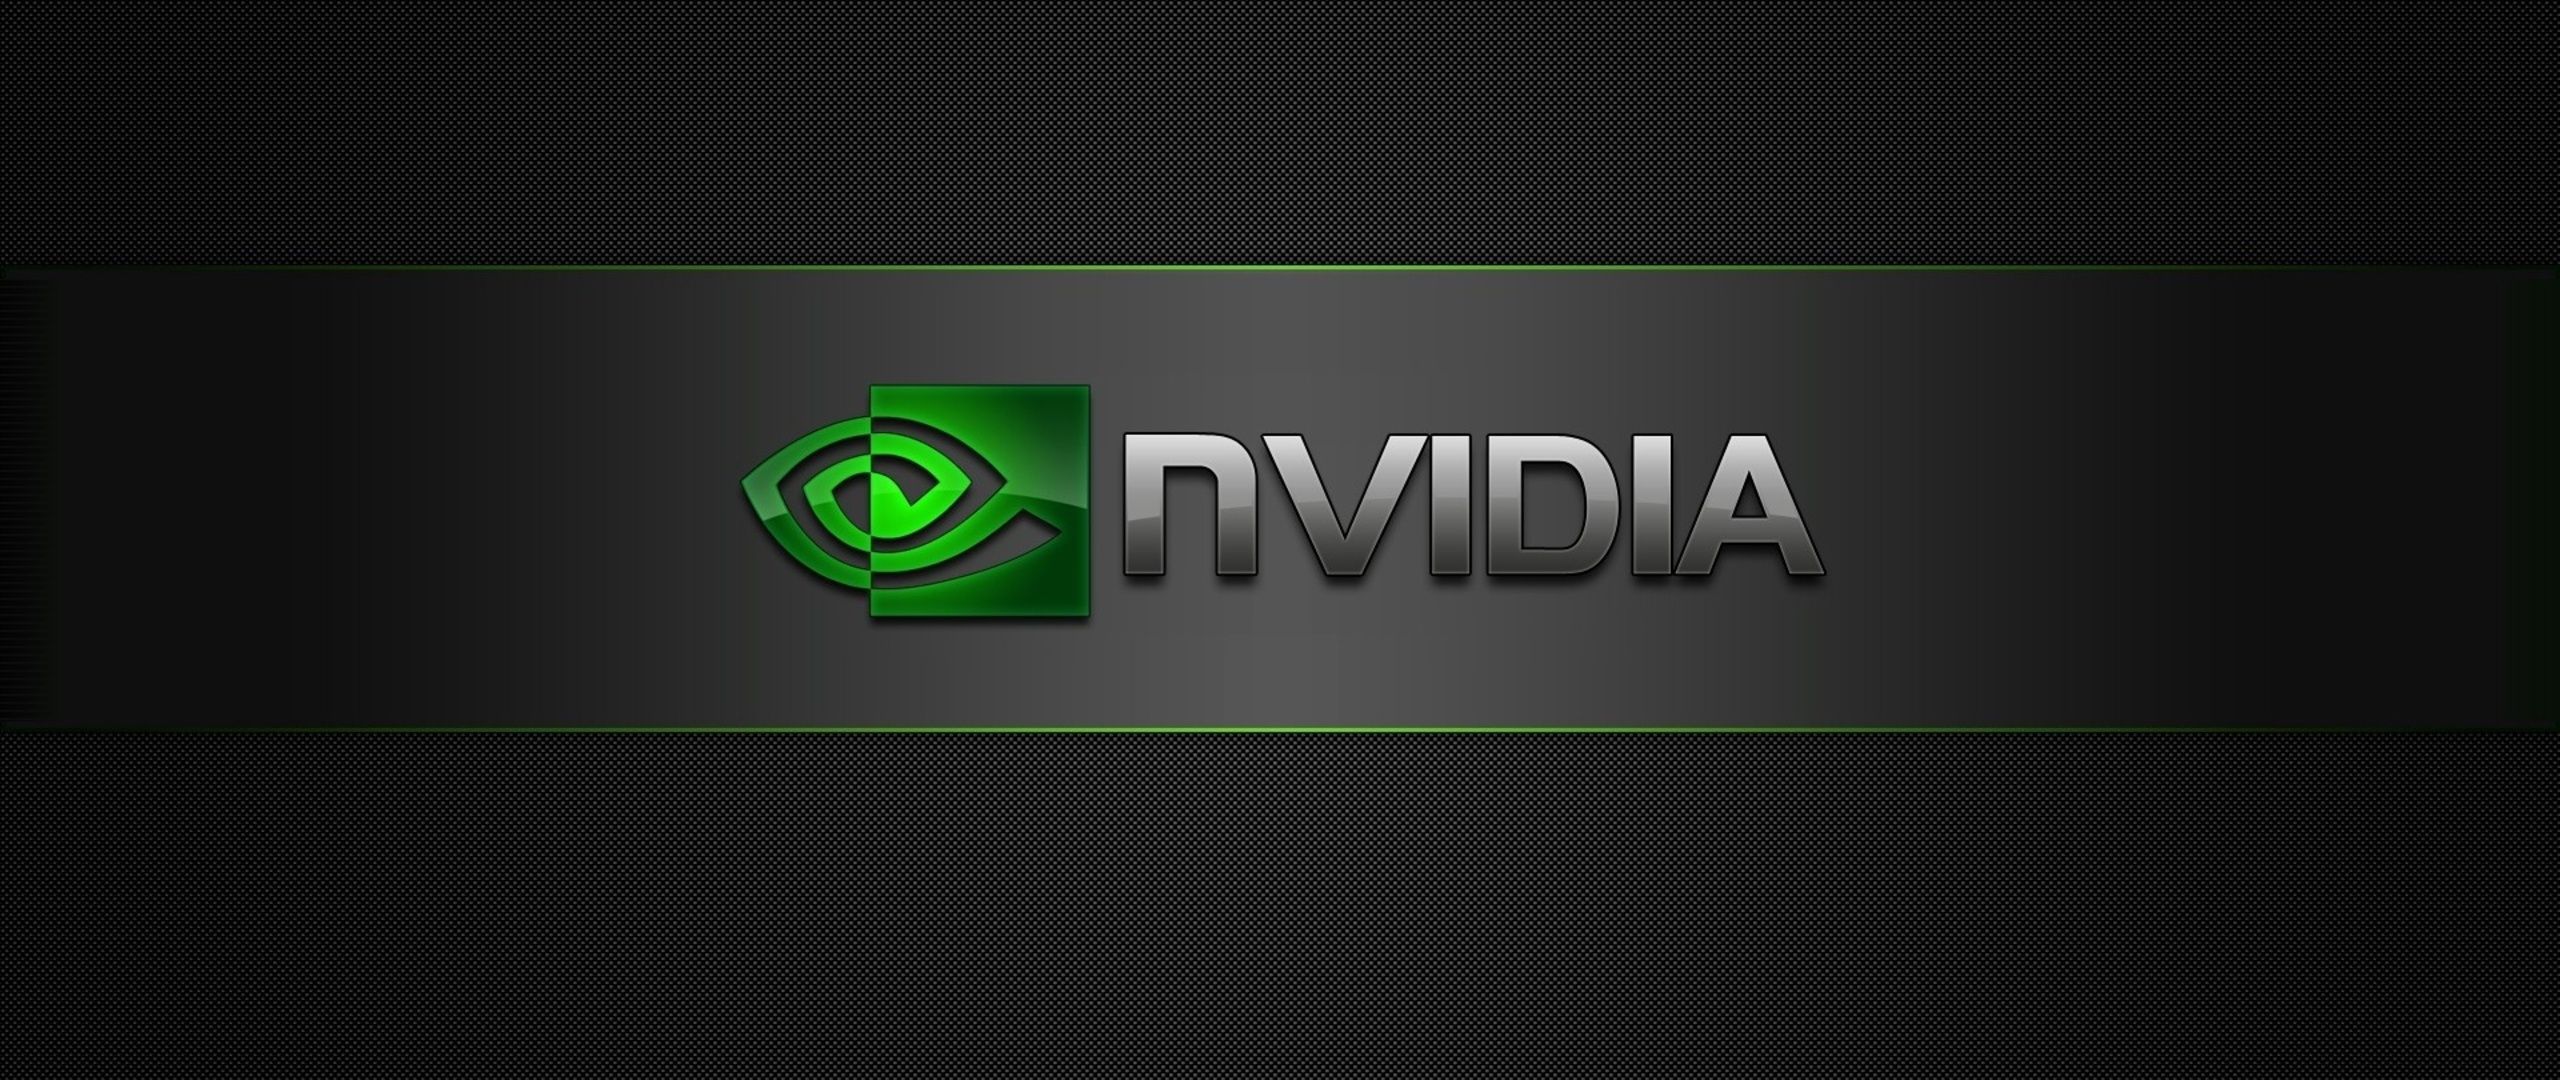 Nvidia: The sole supplier of graphics processors for its X-Box gaming console by Microsoft Corporation. 2560x1080 Dual Screen Background.